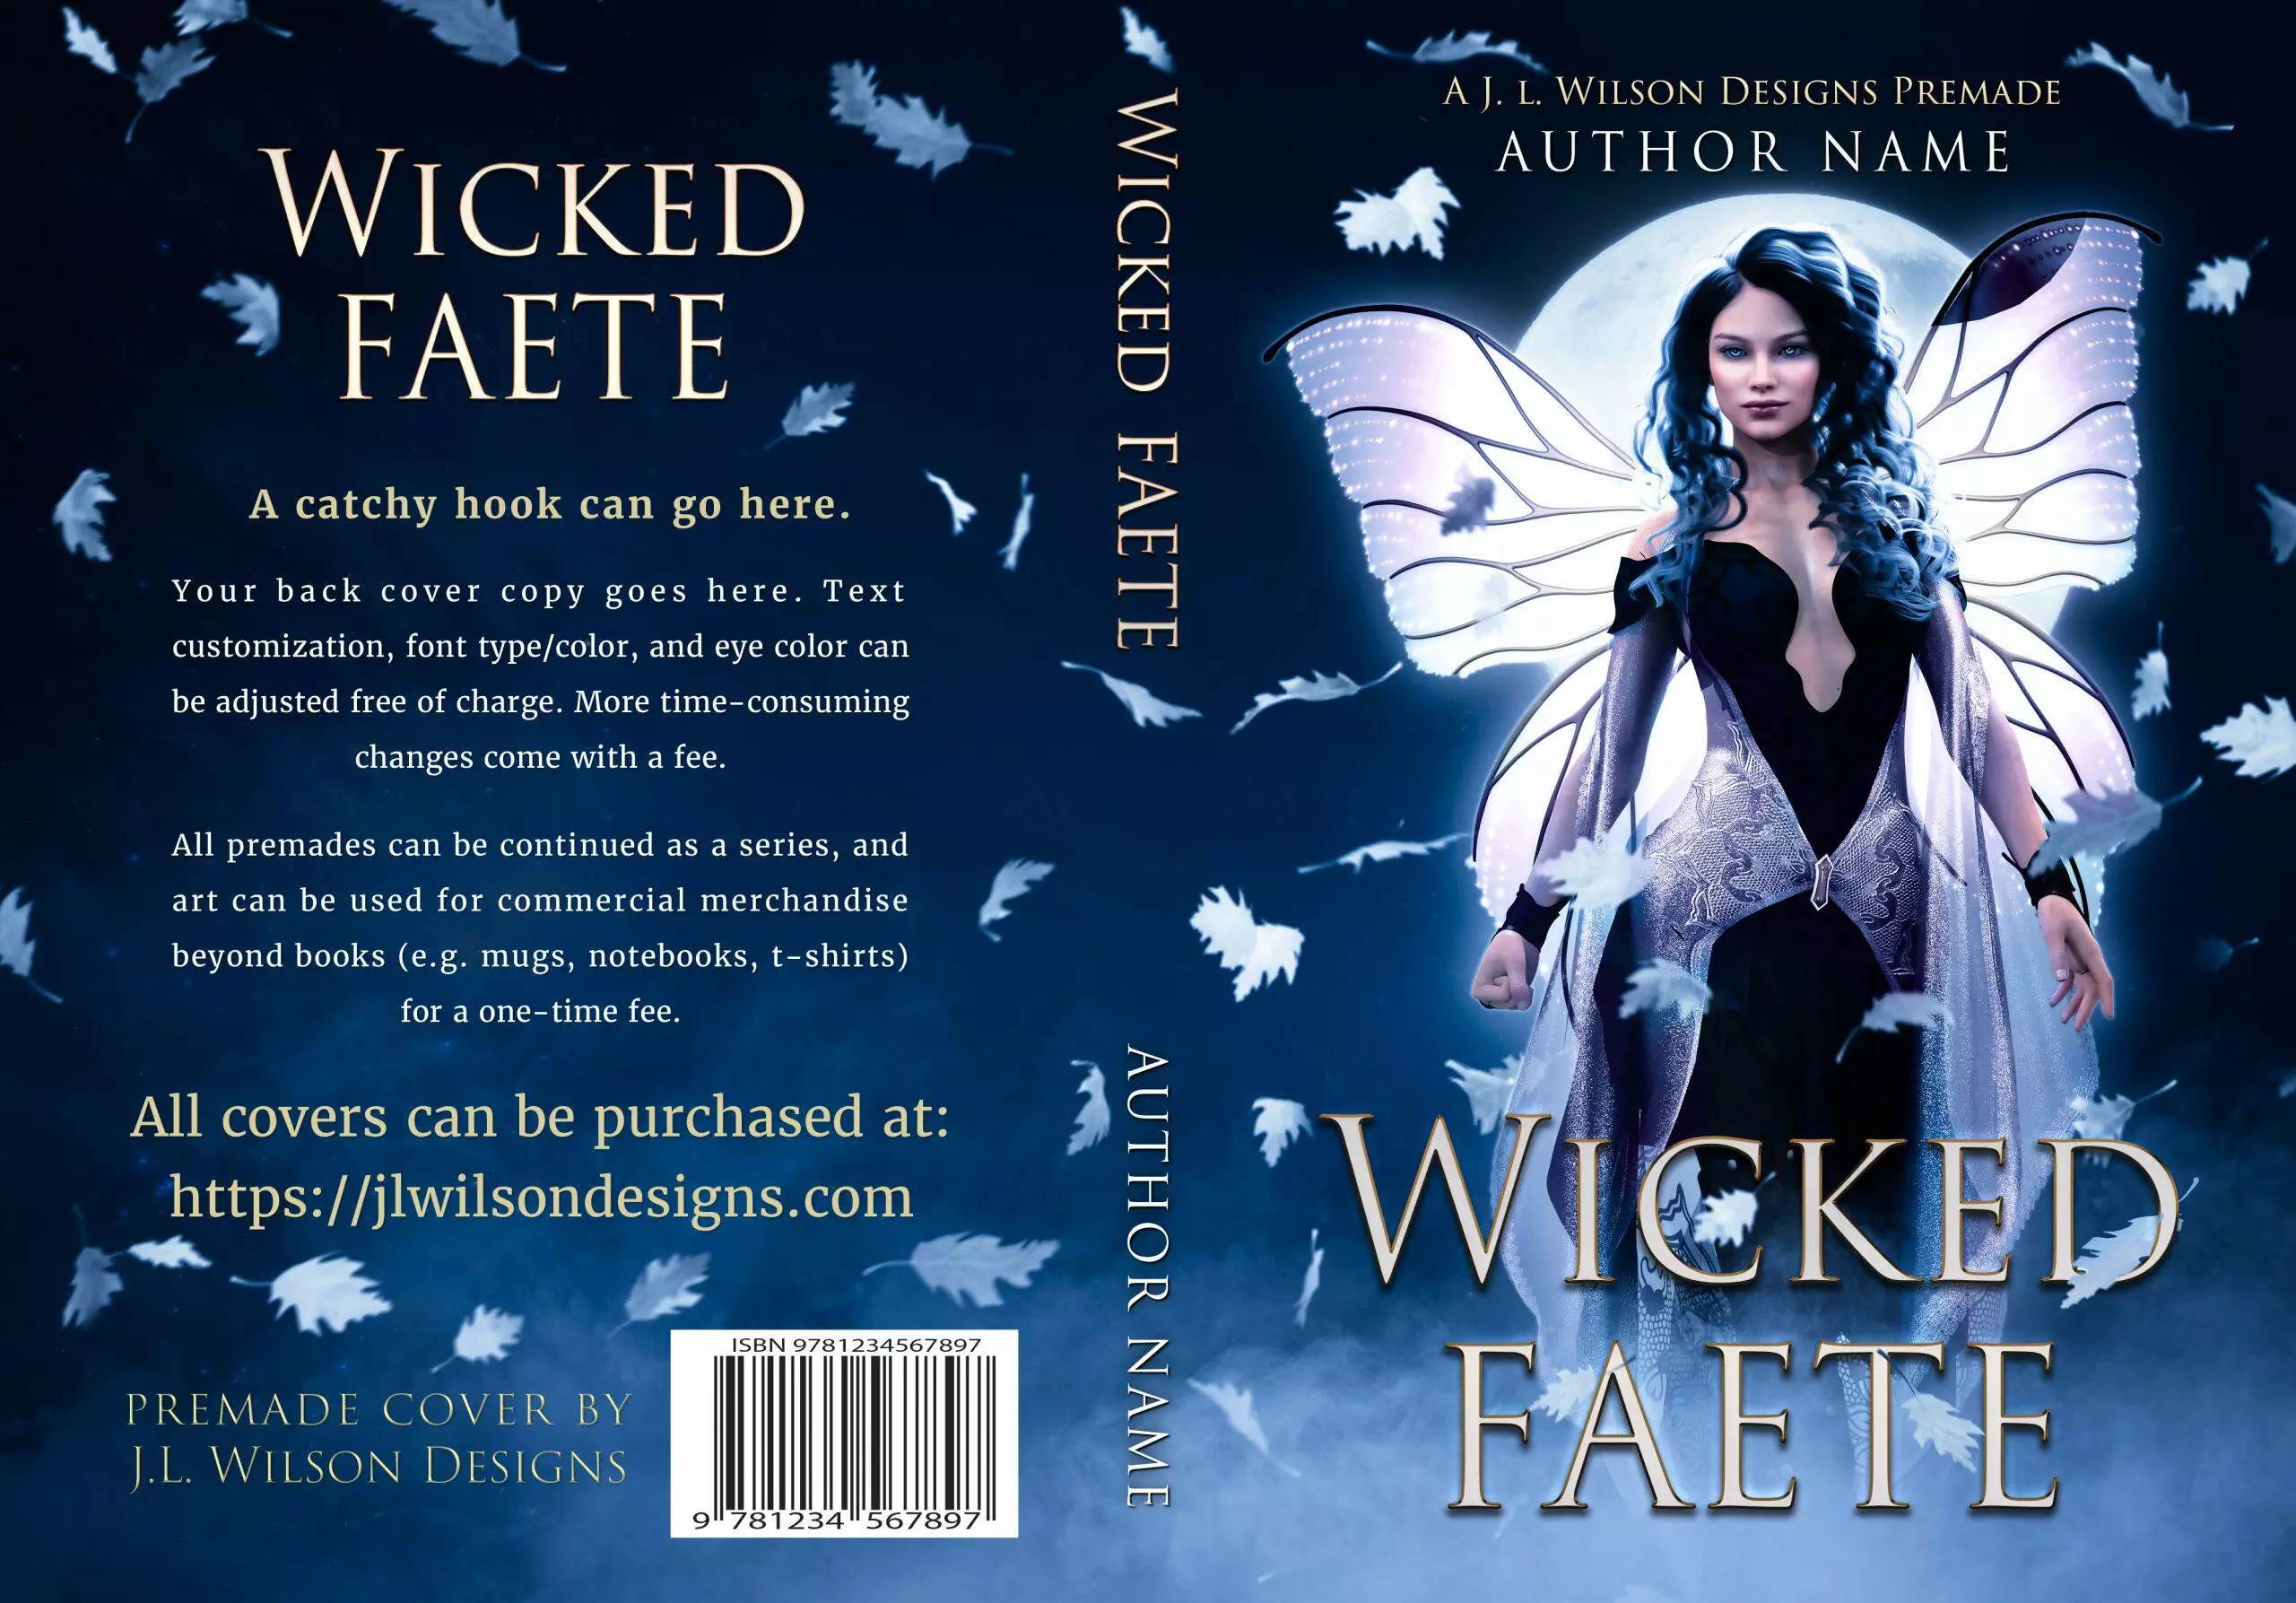 A dark fantasy book cover featuring a beautiful fae woman with fairy wings at night.